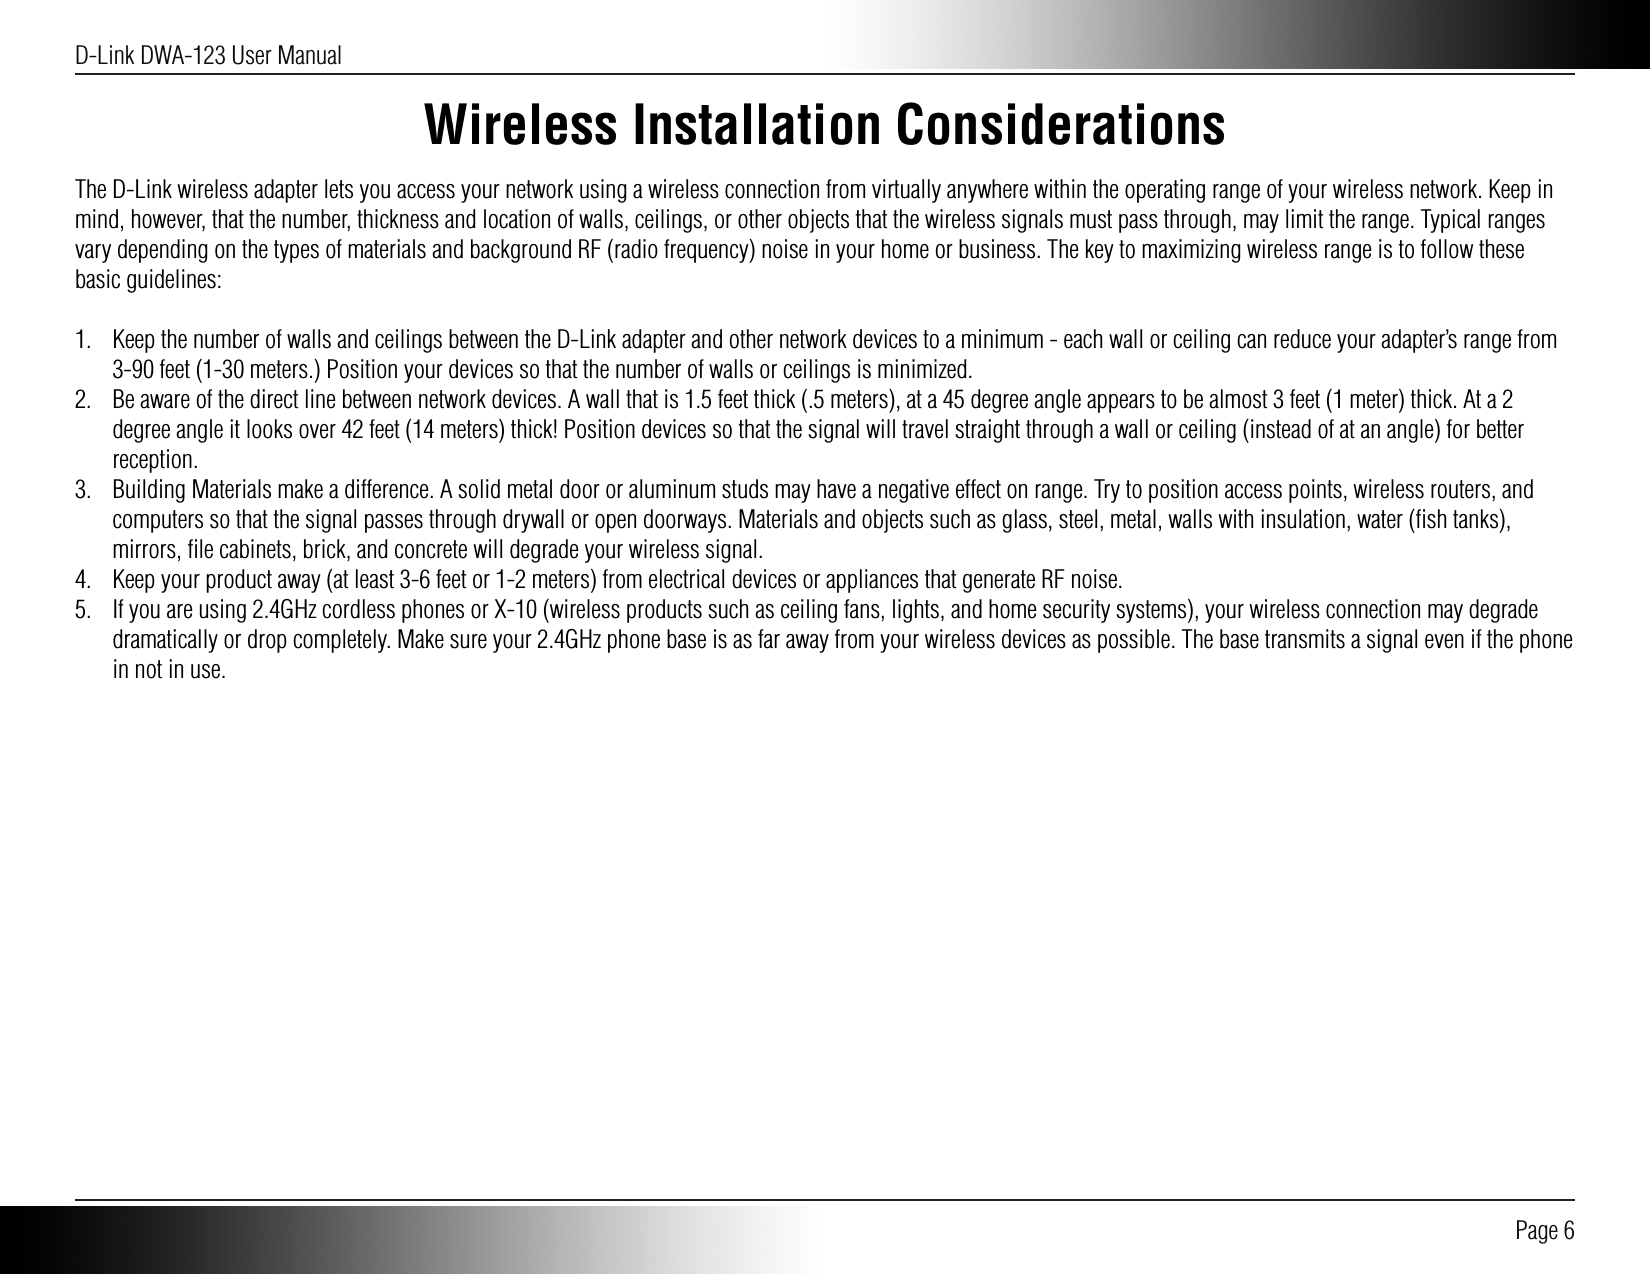 D-Link DWA-123 User Manual Page 6Wireless Installation ConsiderationsThe D-Link wireless adapter lets you access your network using a wireless connection from virtually anywhere within the operating range of your wireless network. Keep in mind, however, that the number, thickness and location of walls, ceilings, or other objects that the wireless signals must pass through, may limit the range. Typical ranges vary depending on the types of materials and background RF (radio frequency) noise in your home or business. The key to maximizing wireless range is to follow these basic guidelines:1.  Keep the number of walls and ceilings between the D-Link adapter and other network devices to a minimum - each wall or ceiling can reduce your adapter’s range from 3-90 feet (1-30 meters.) Position your devices so that the number of walls or ceilings is minimized.2.  Be aware of the direct line between network devices. A wall that is 1.5 feet thick (.5 meters), at a 45 degree angle appears to be almost 3 feet (1 meter) thick. At a 2 degree angle it looks over 42 feet (14 meters) thick! Position devices so that the signal will travel straight through a wall or ceiling (instead of at an angle) for better reception.3.  Building Materials make a difference. A solid metal door or aluminum studs may have a negative effect on range. Try to position access points, wireless routers, and computers so that the signal passes through drywall or open doorways. Materials and objects such as glass, steel, metal, walls with insulation, water (ﬁsh tanks), mirrors, ﬁle cabinets, brick, and concrete will degrade your wireless signal.4.  Keep your product away (at least 3-6 feet or 1-2 meters) from electrical devices or appliances that generate RF noise.5.  If you are using 2.4GHz cordless phones or X-10 (wireless products such as ceiling fans, lights, and home security systems), your wireless connection may degrade dramatically or drop completely. Make sure your 2.4GHz phone base is as far away from your wireless devices as possible. The base transmits a signal even if the phone in not in use.